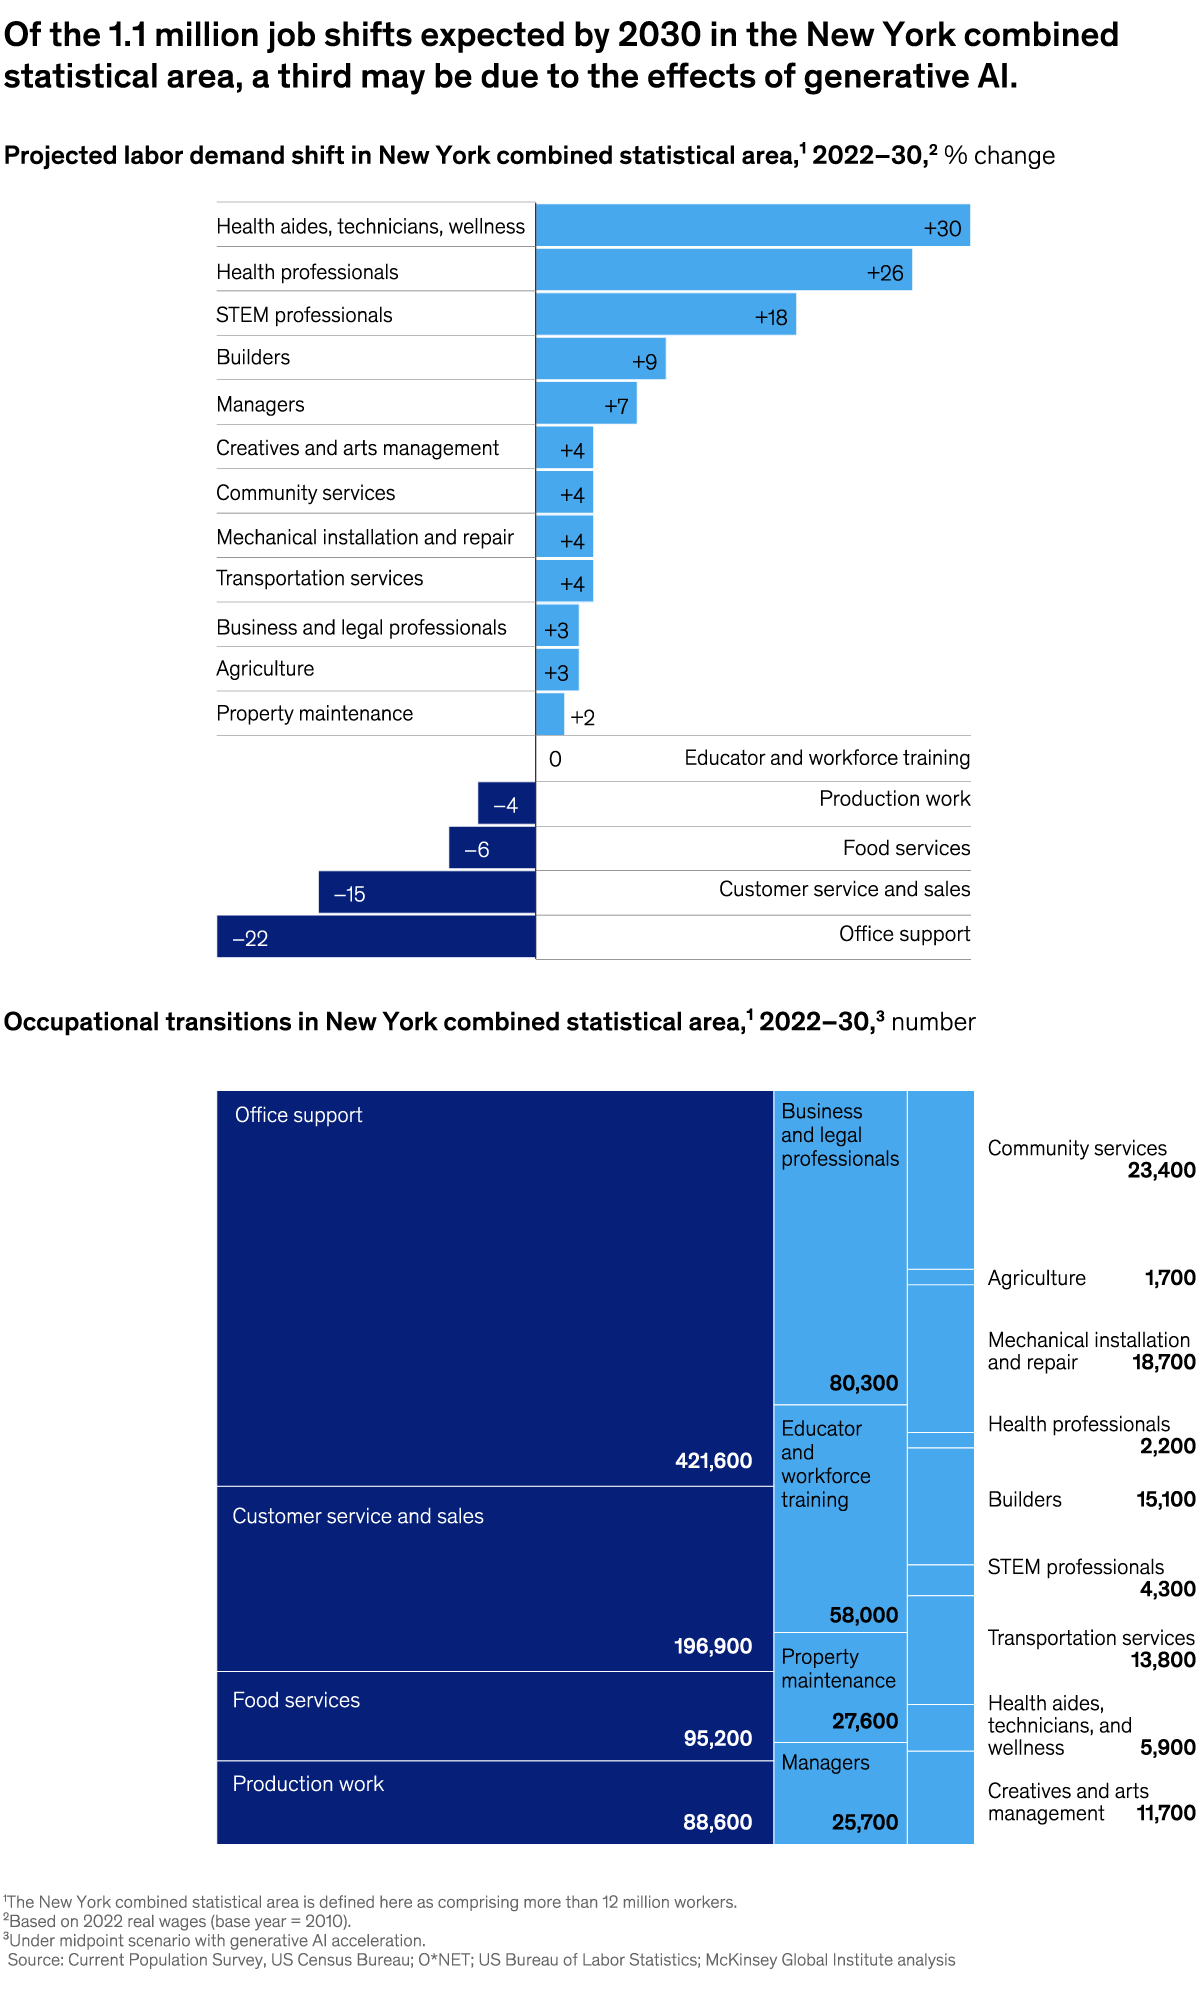 A chart titled “Of the 1.1 million job shifts expected by 2030 in the New York combined statistical area, a third may be due to the effects of generative AI.” Click to open the full article on McKinsey.com.